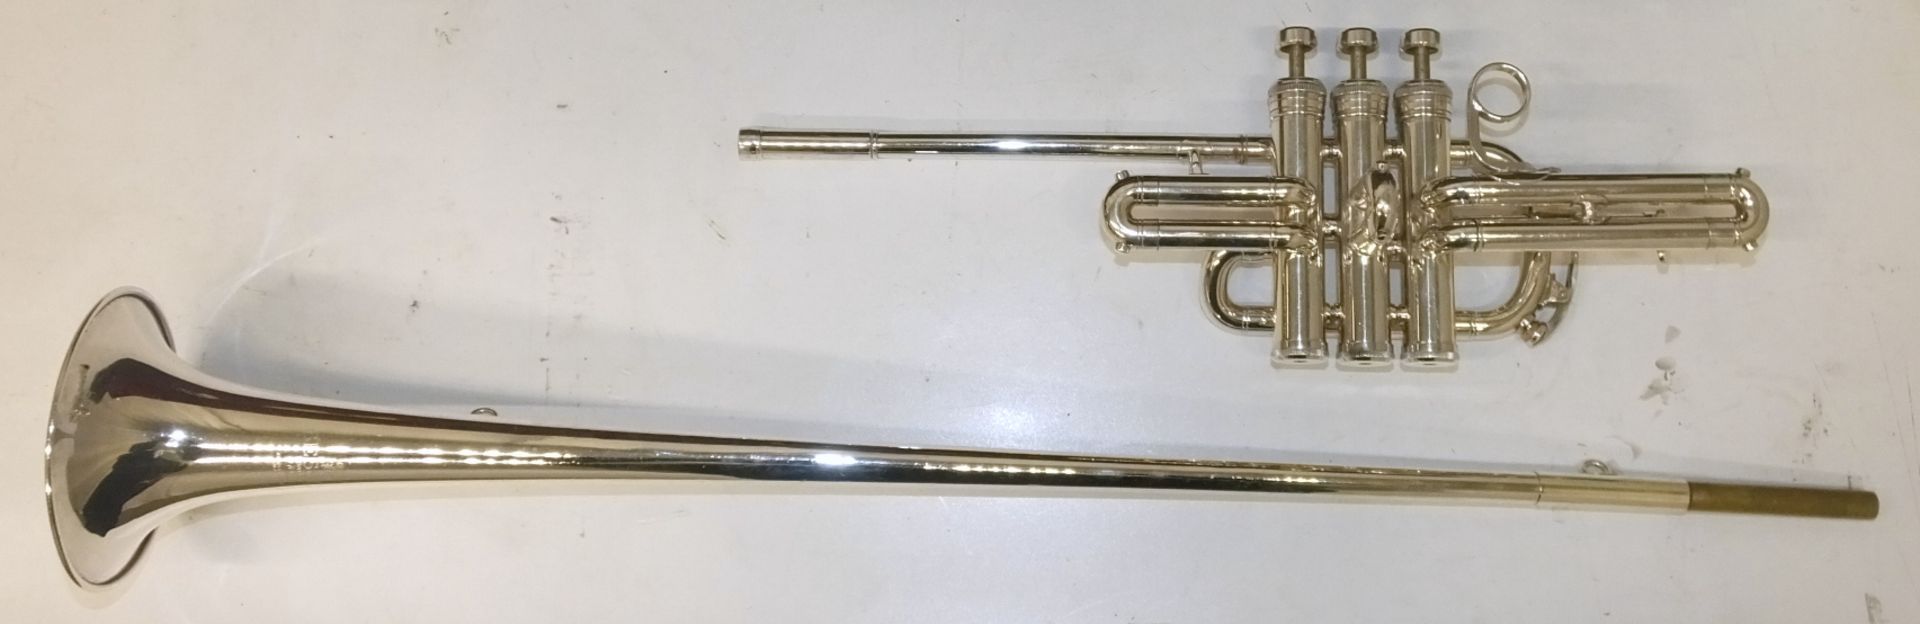 Besson 700 Fanfare Trumpet in case - Serial Number - 706 - 837756 - Image 3 of 10